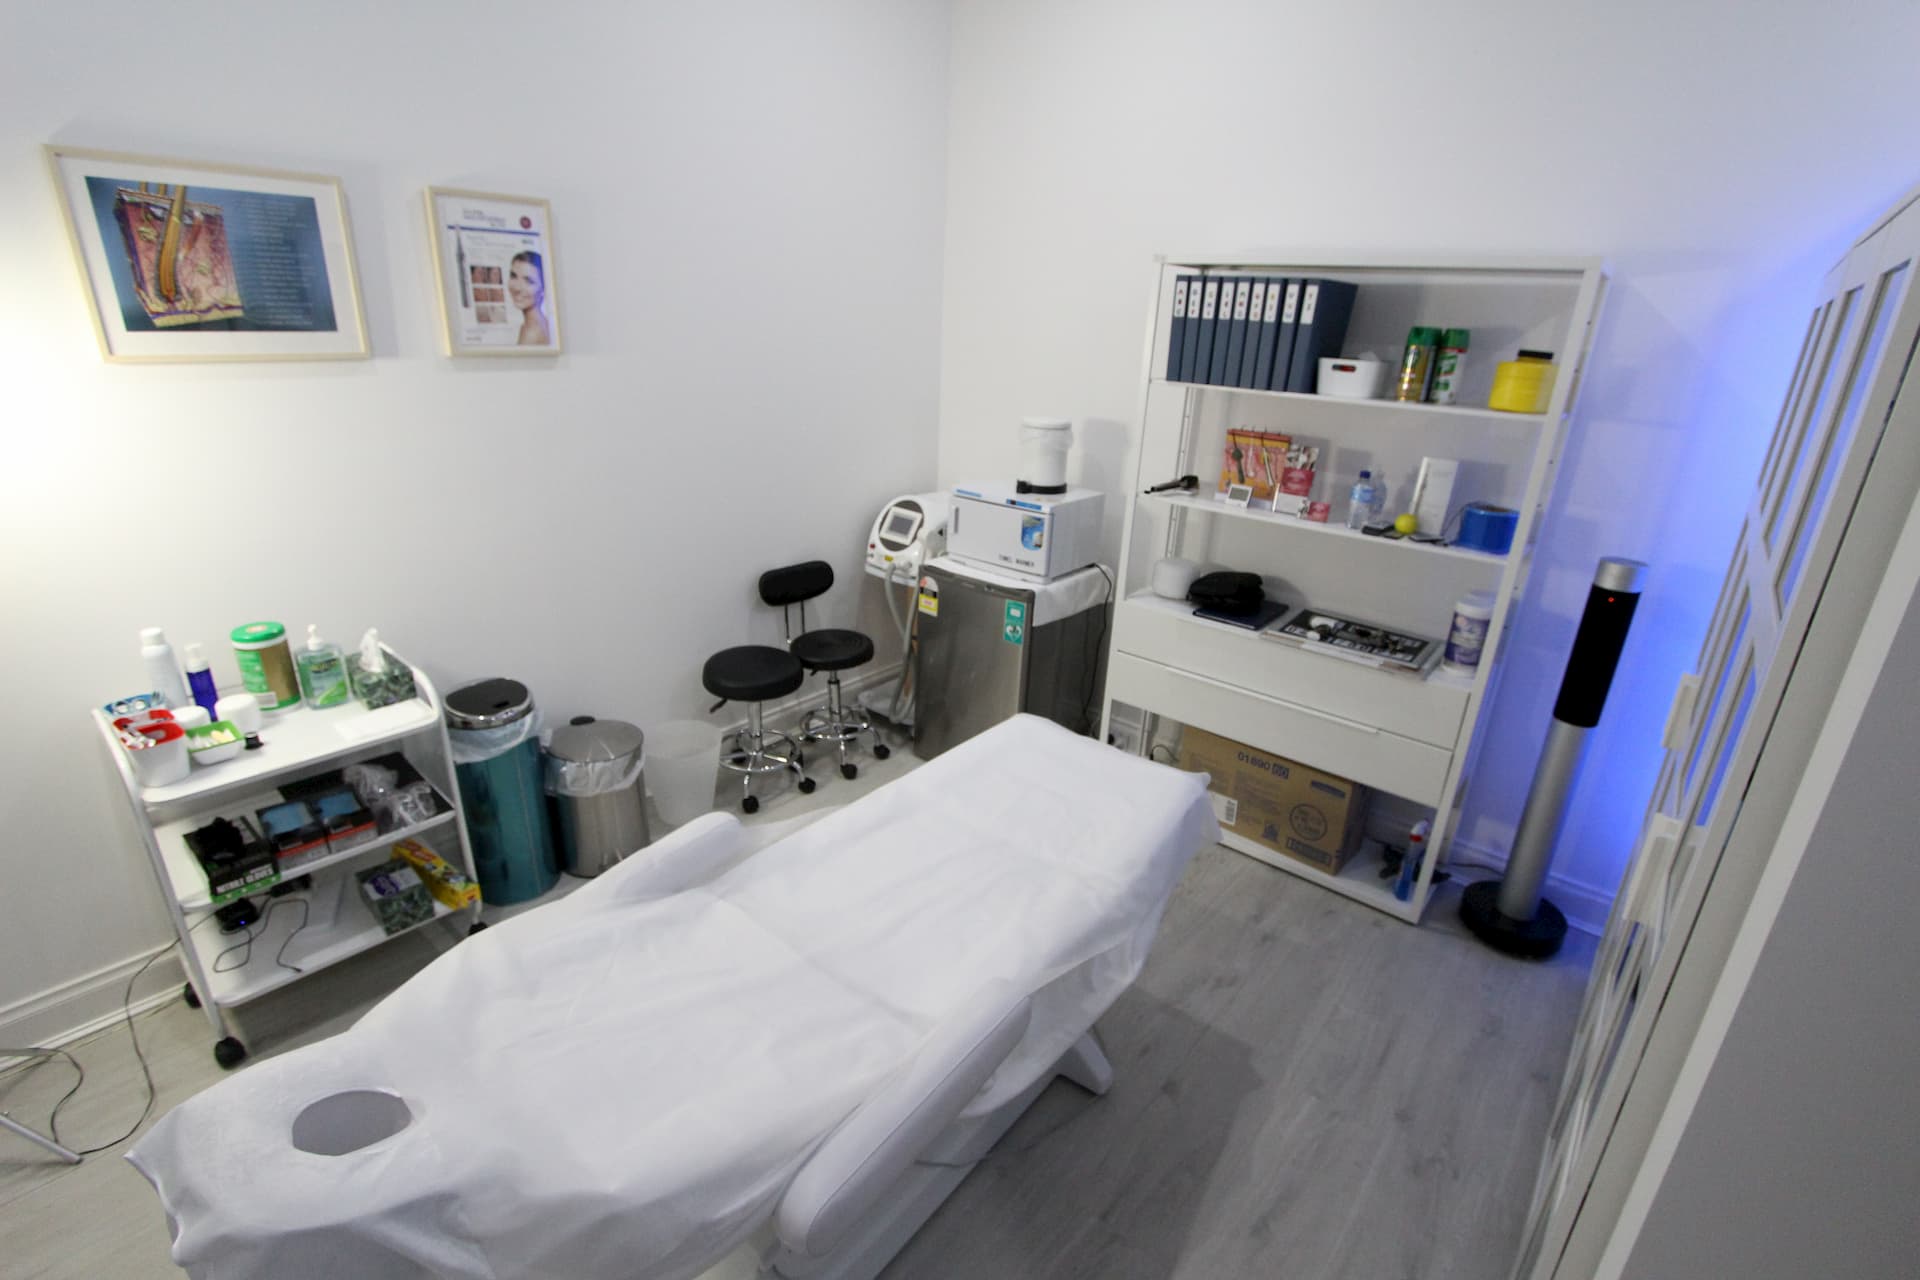 Laser Tattoo Removal treatment area available to residents of Kilburn and surrounding suburbs.